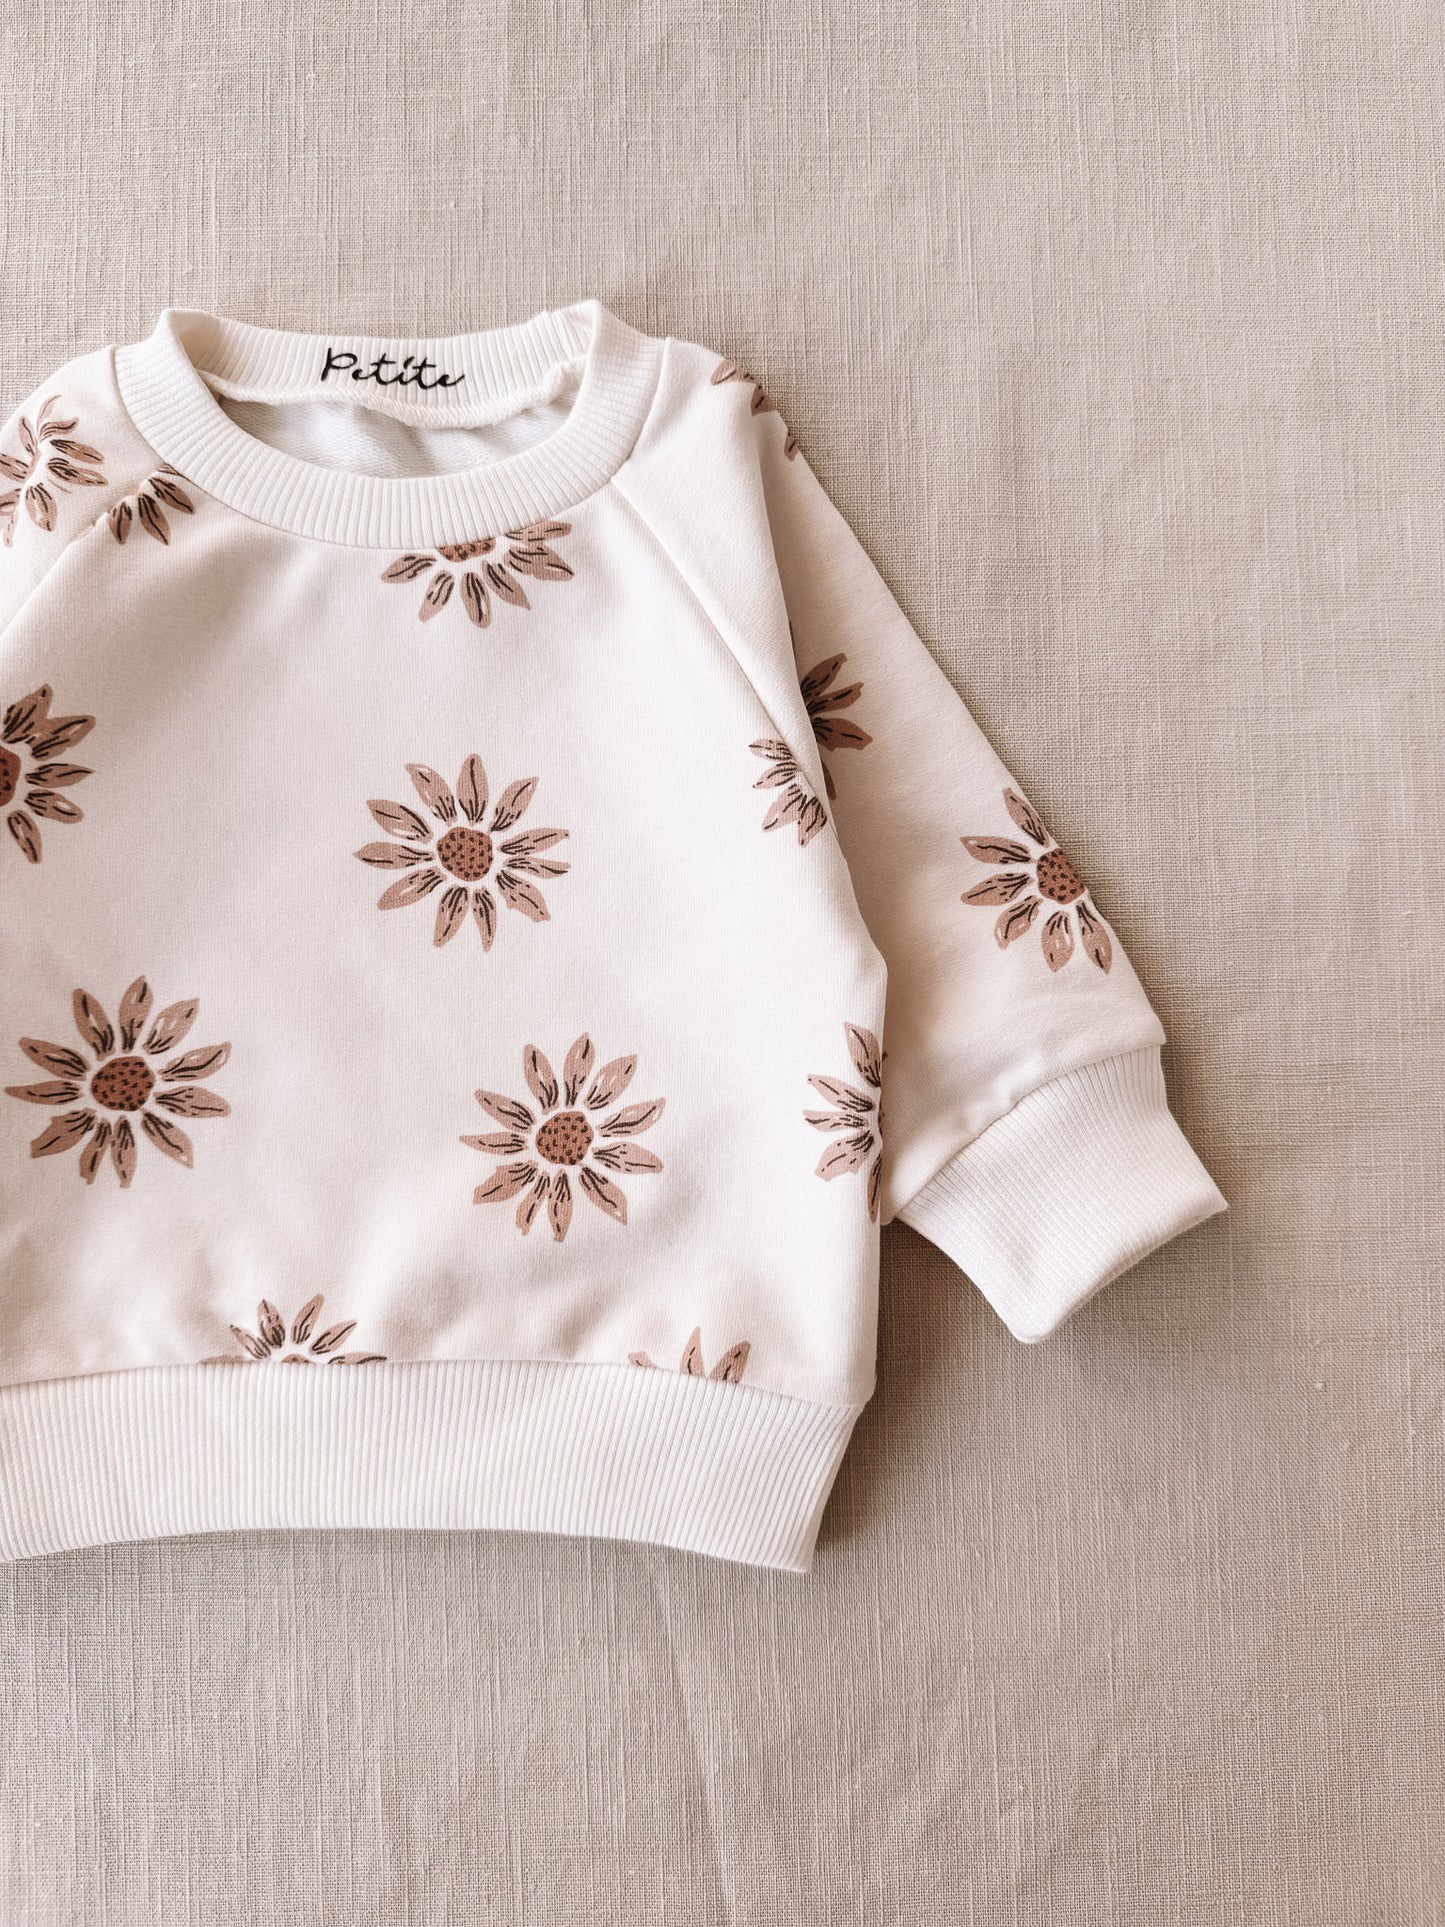 Load image into Gallery viewer, Baby cotton sweatshirt / sunflowers
